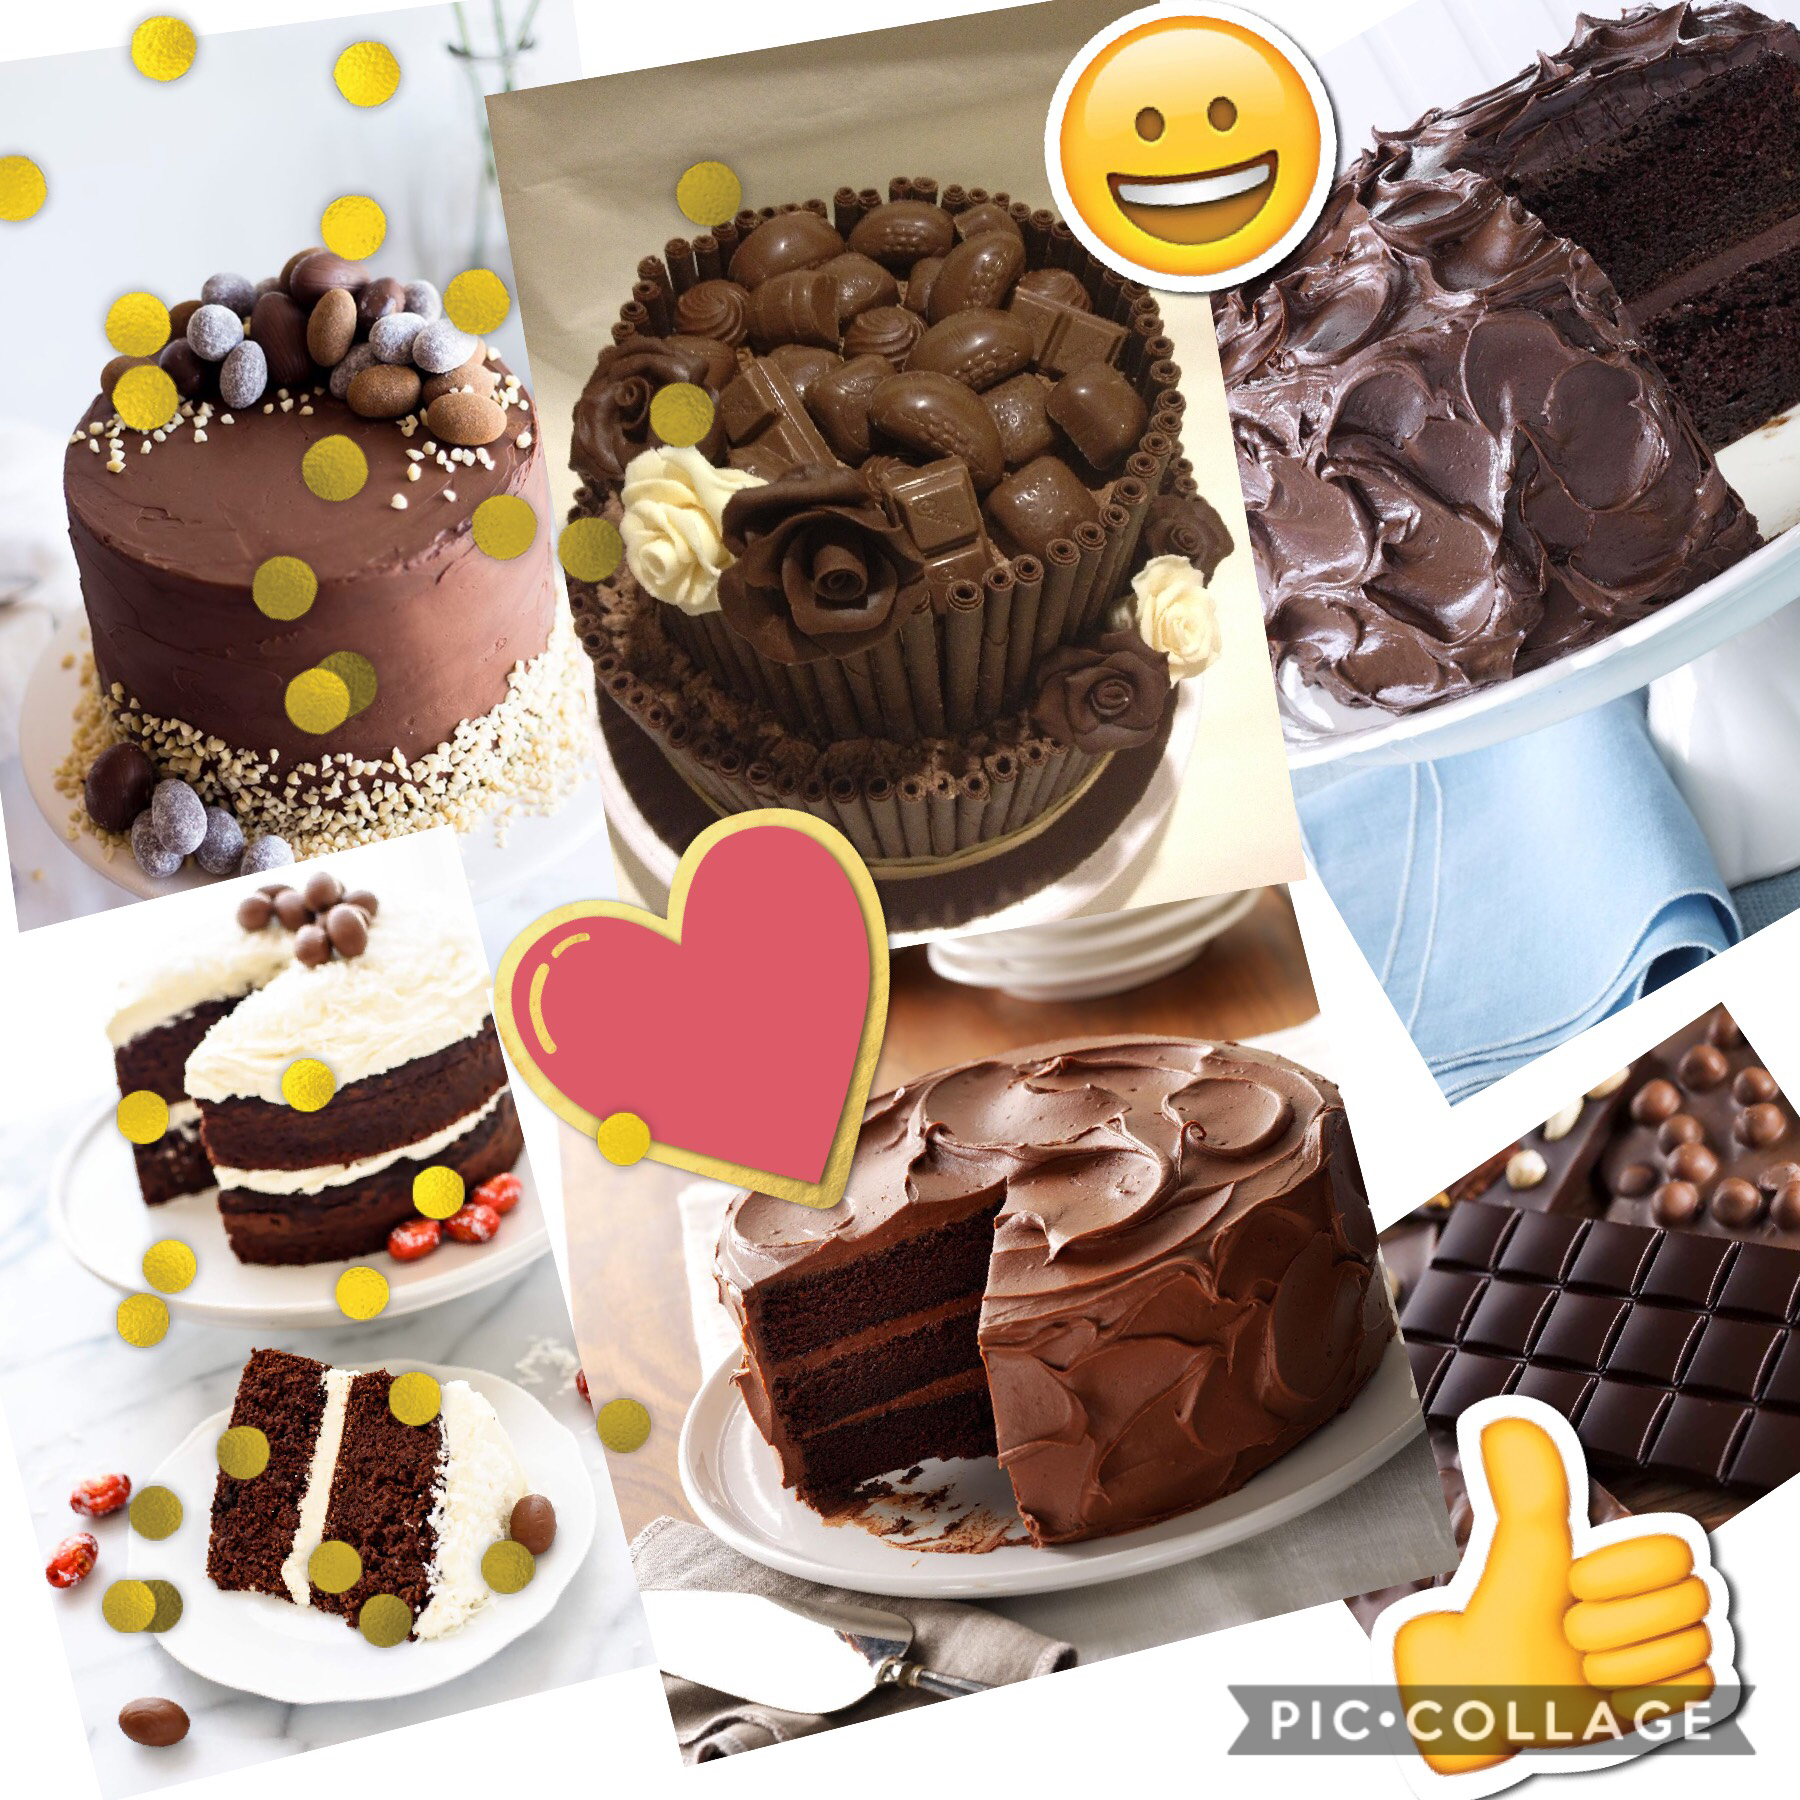 Cake is the best🍫🍩🥧🧁🍰🎂